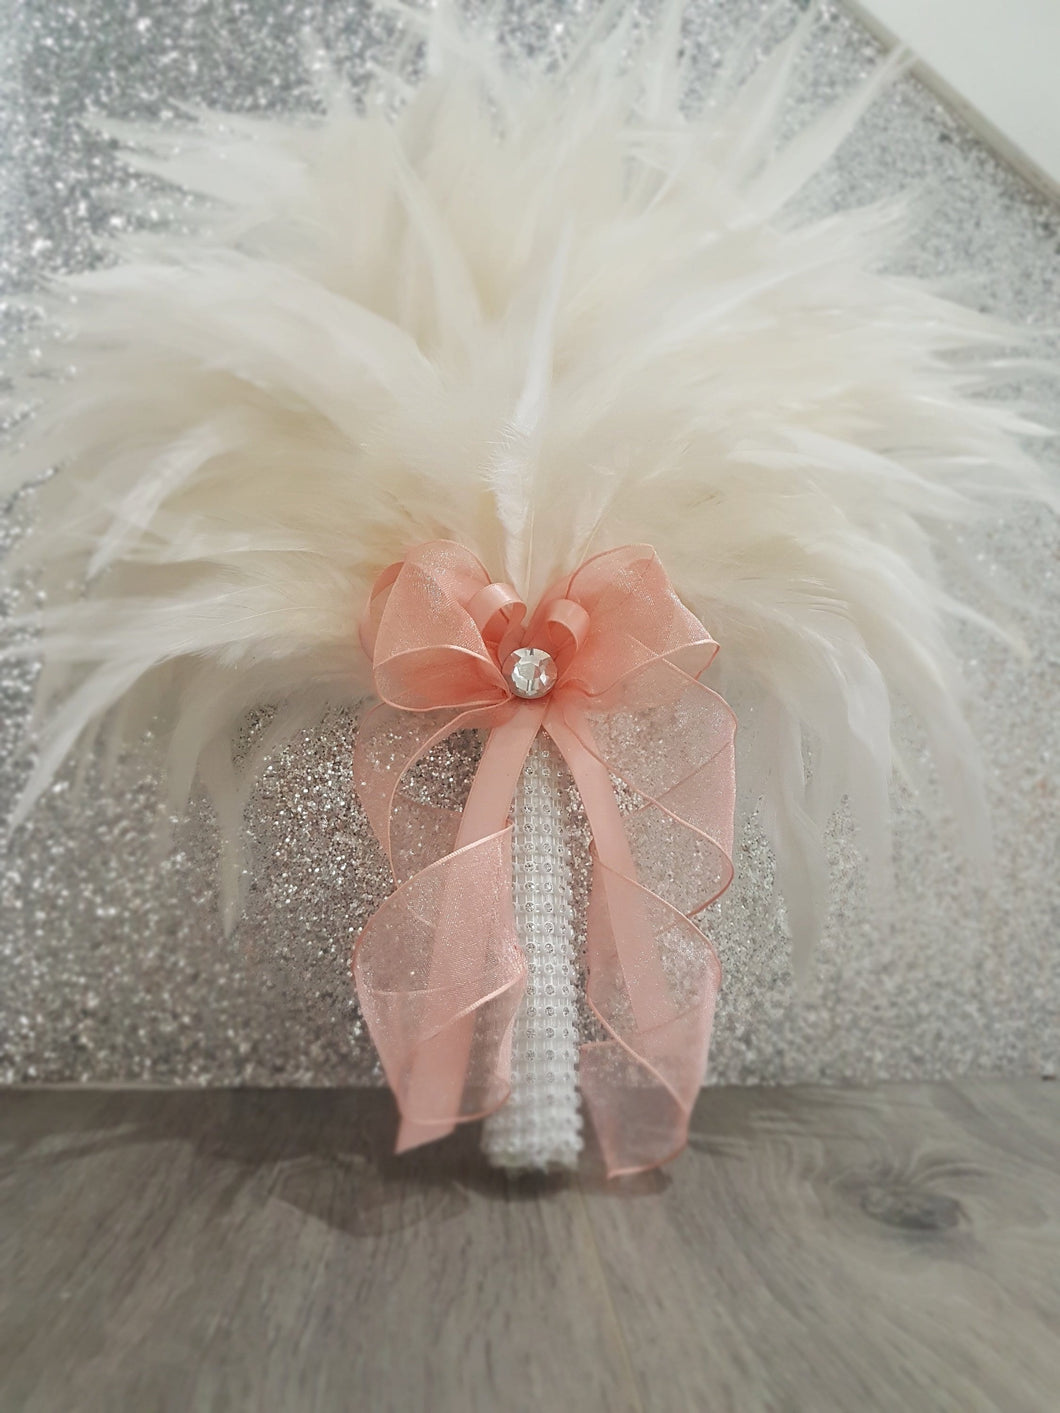 Brides Feather bouquet, Great Gatsby wedding style -ready to ship by Crystal wedding uk